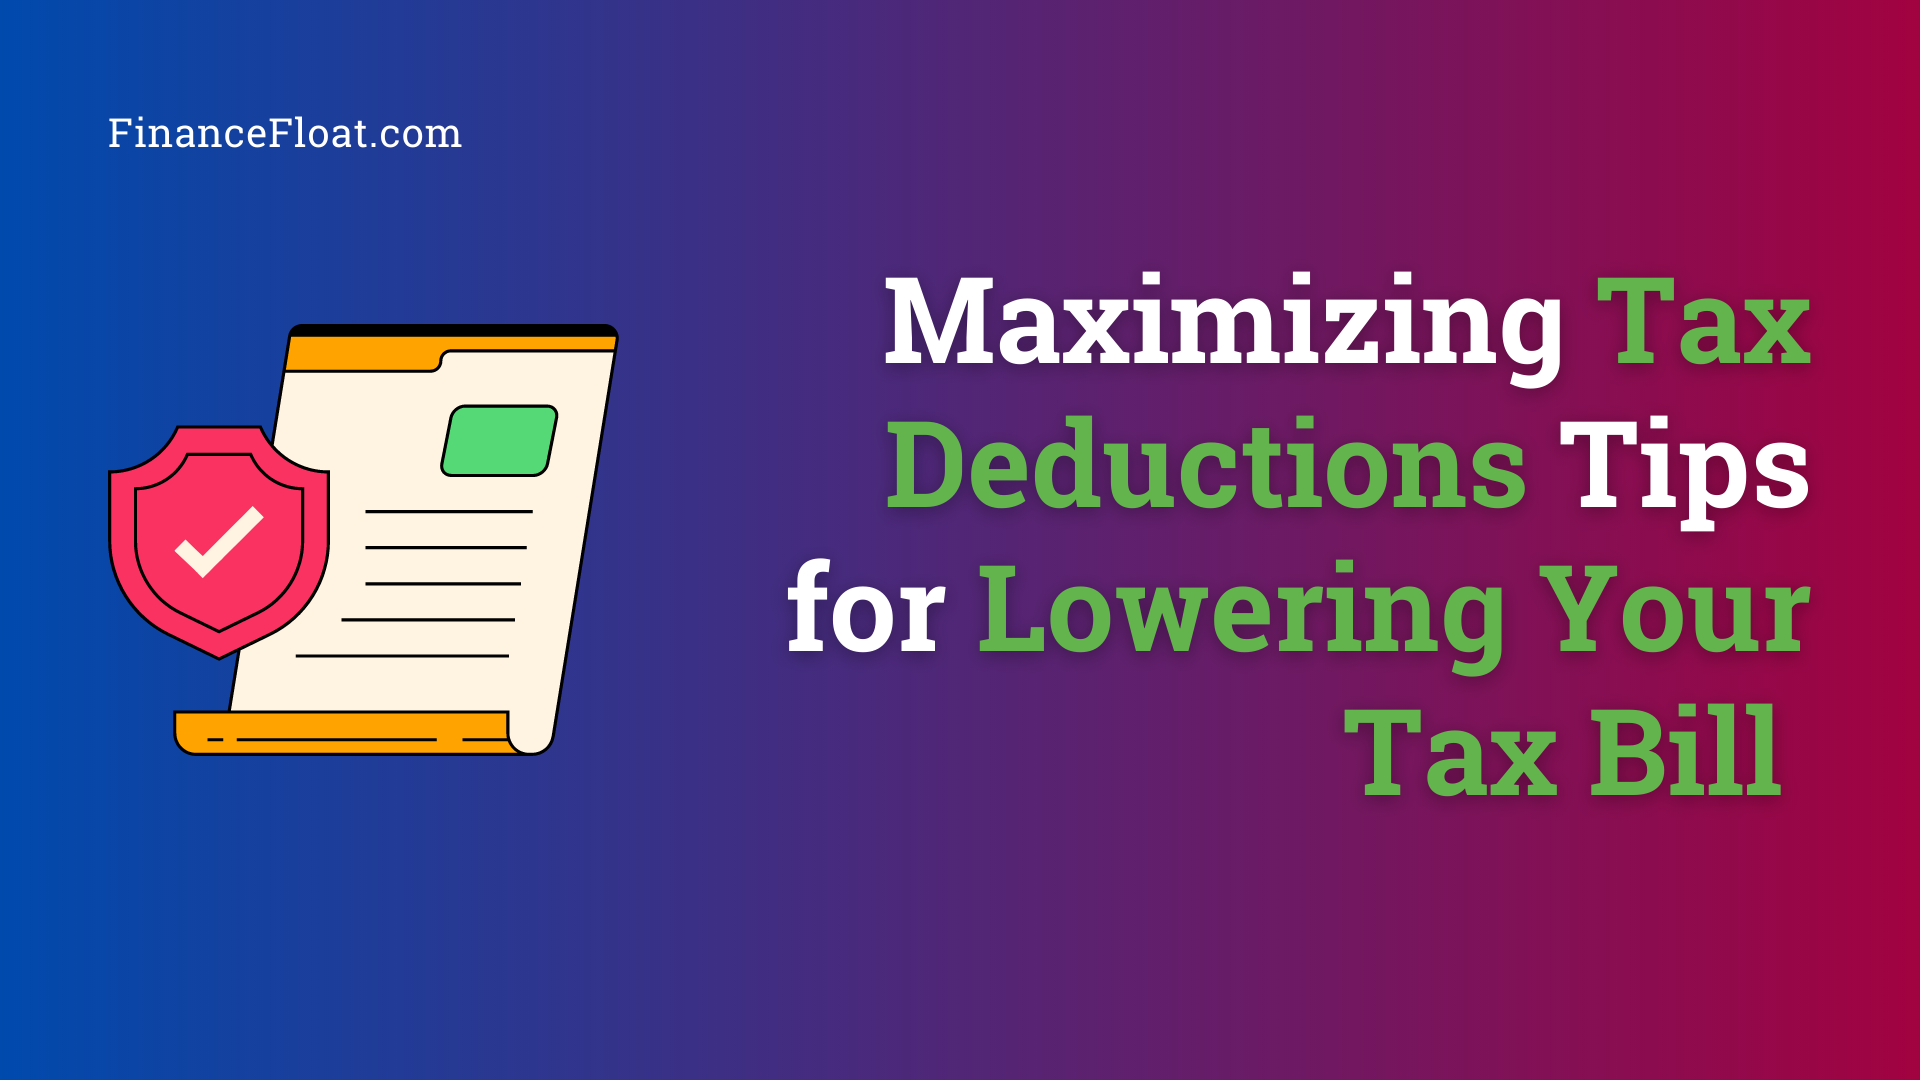 Maximizing Tax Deductions Tips for Lowering Your Tax Bill.